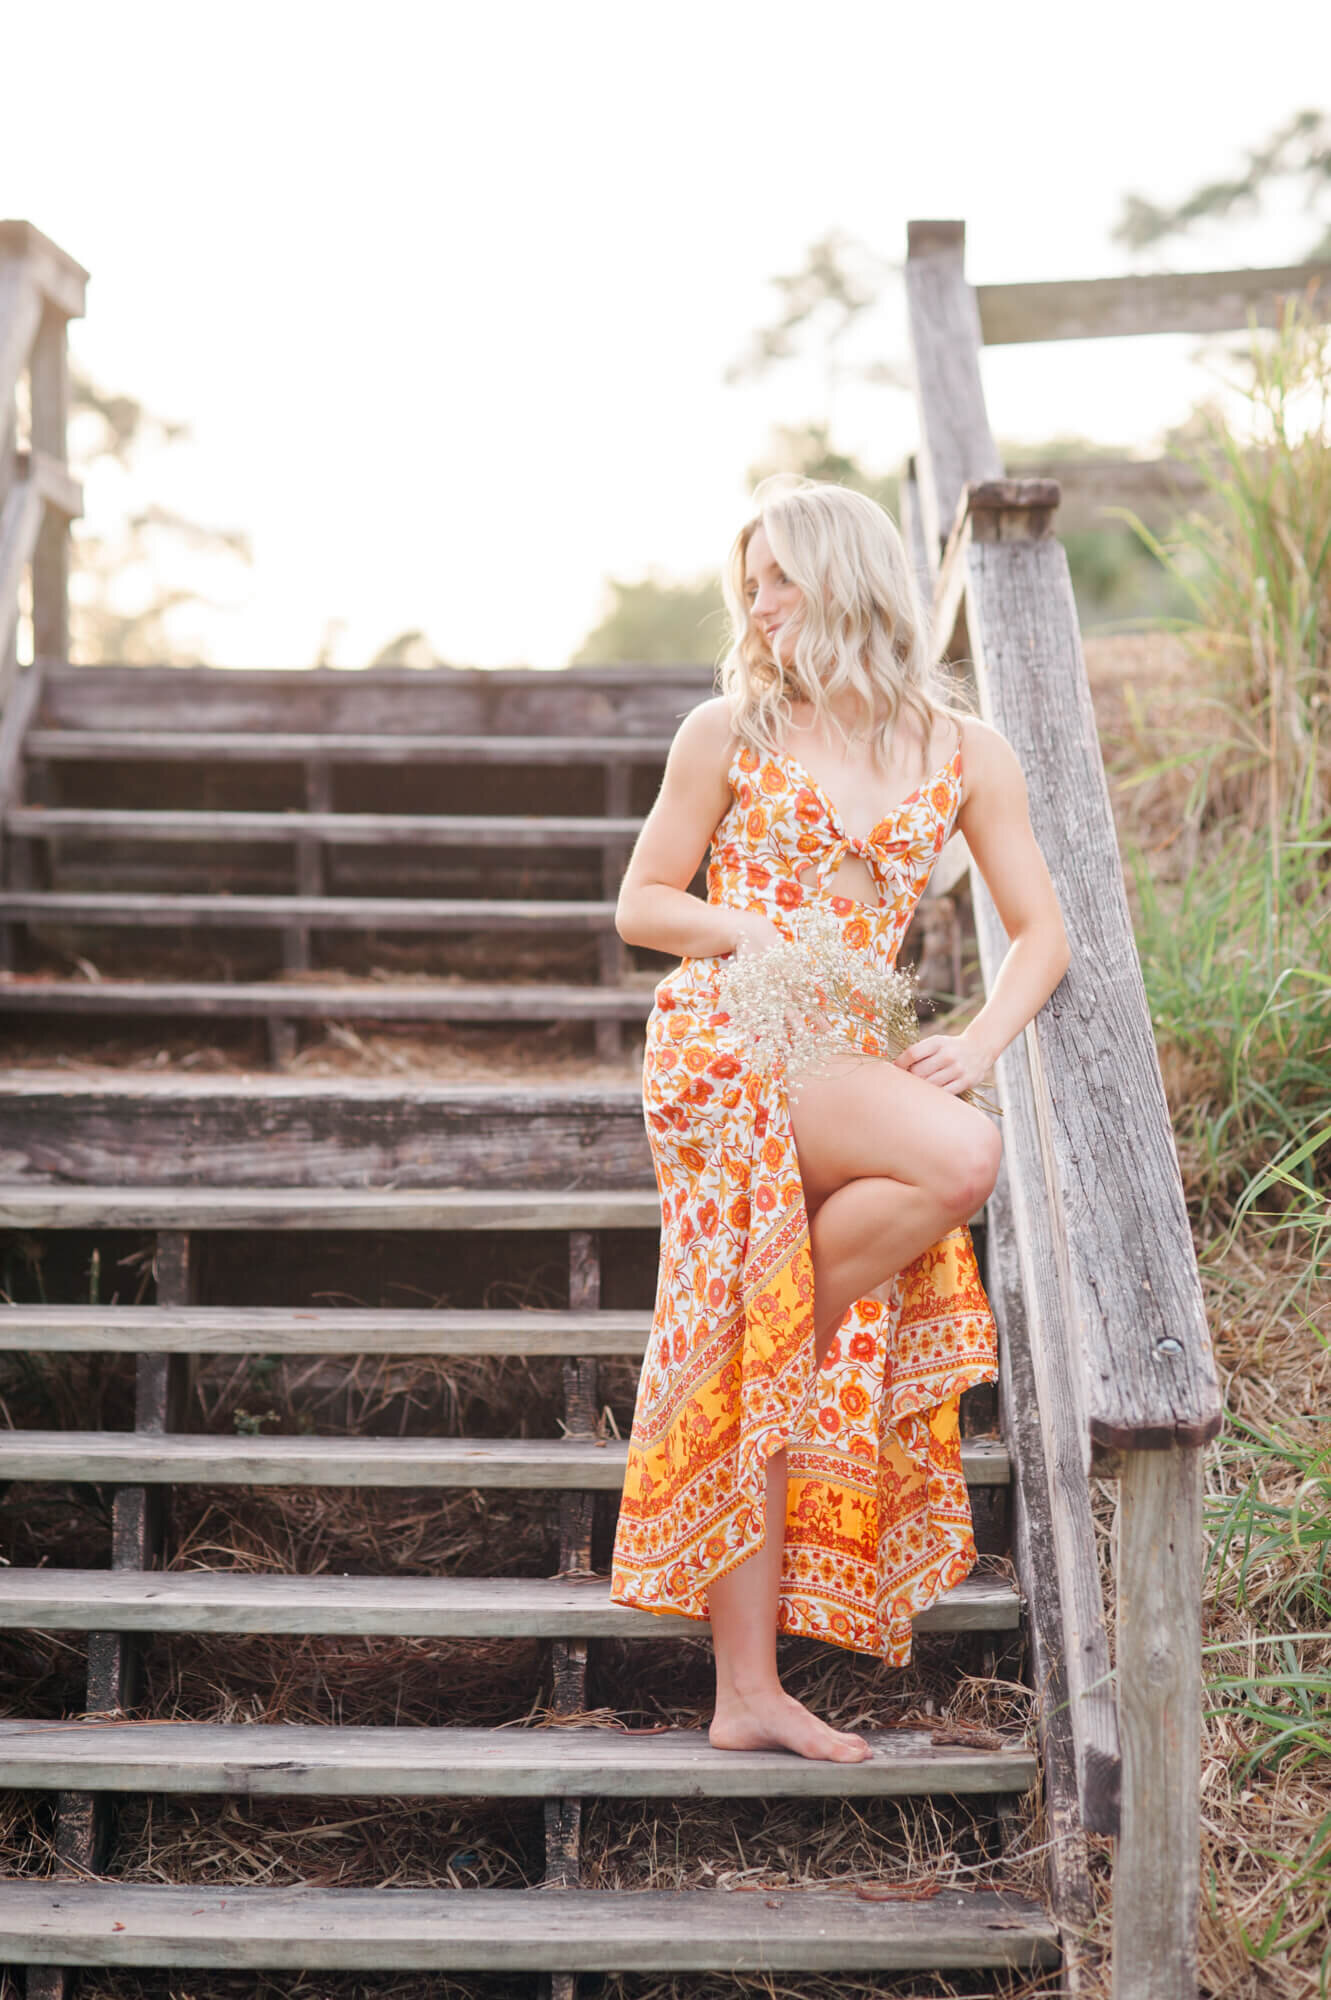 Senior dance girl stands in a dance pose on a wooden stair case at a park in Winter Park during her senior photo session